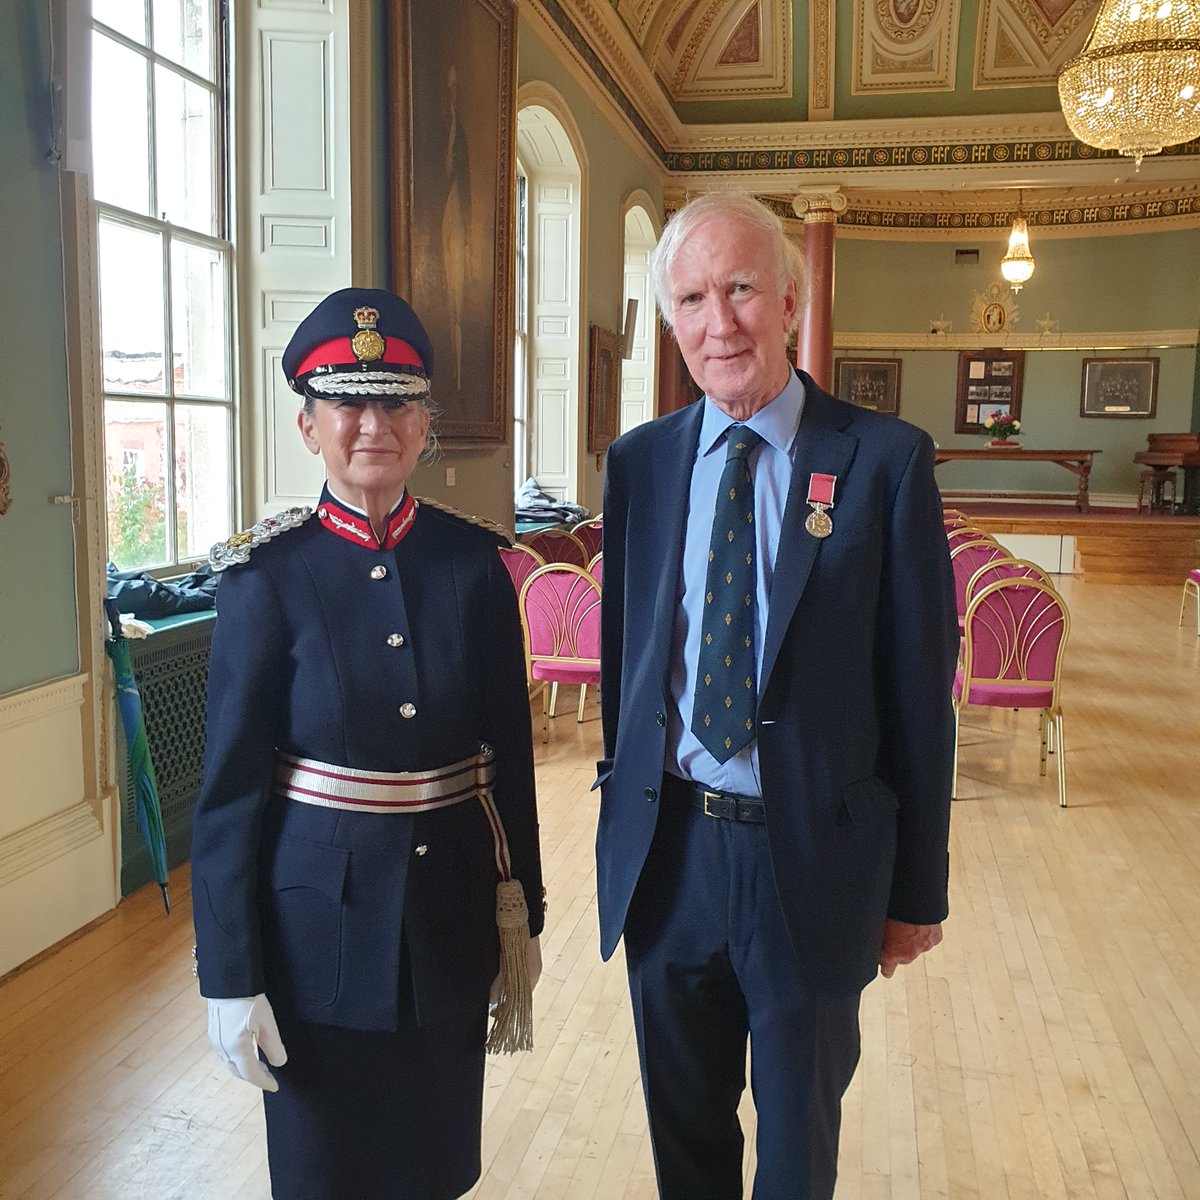 #mineralmonday A memorable afternoon on 20 Oct when I attended a ceremony  at Worcester Guildhall to collect my British Empire Medal, awarded for 'services to mineralogy' in the King's Birthday Honours List. Thank you to everyone who helped make this happen. #minerals #geology